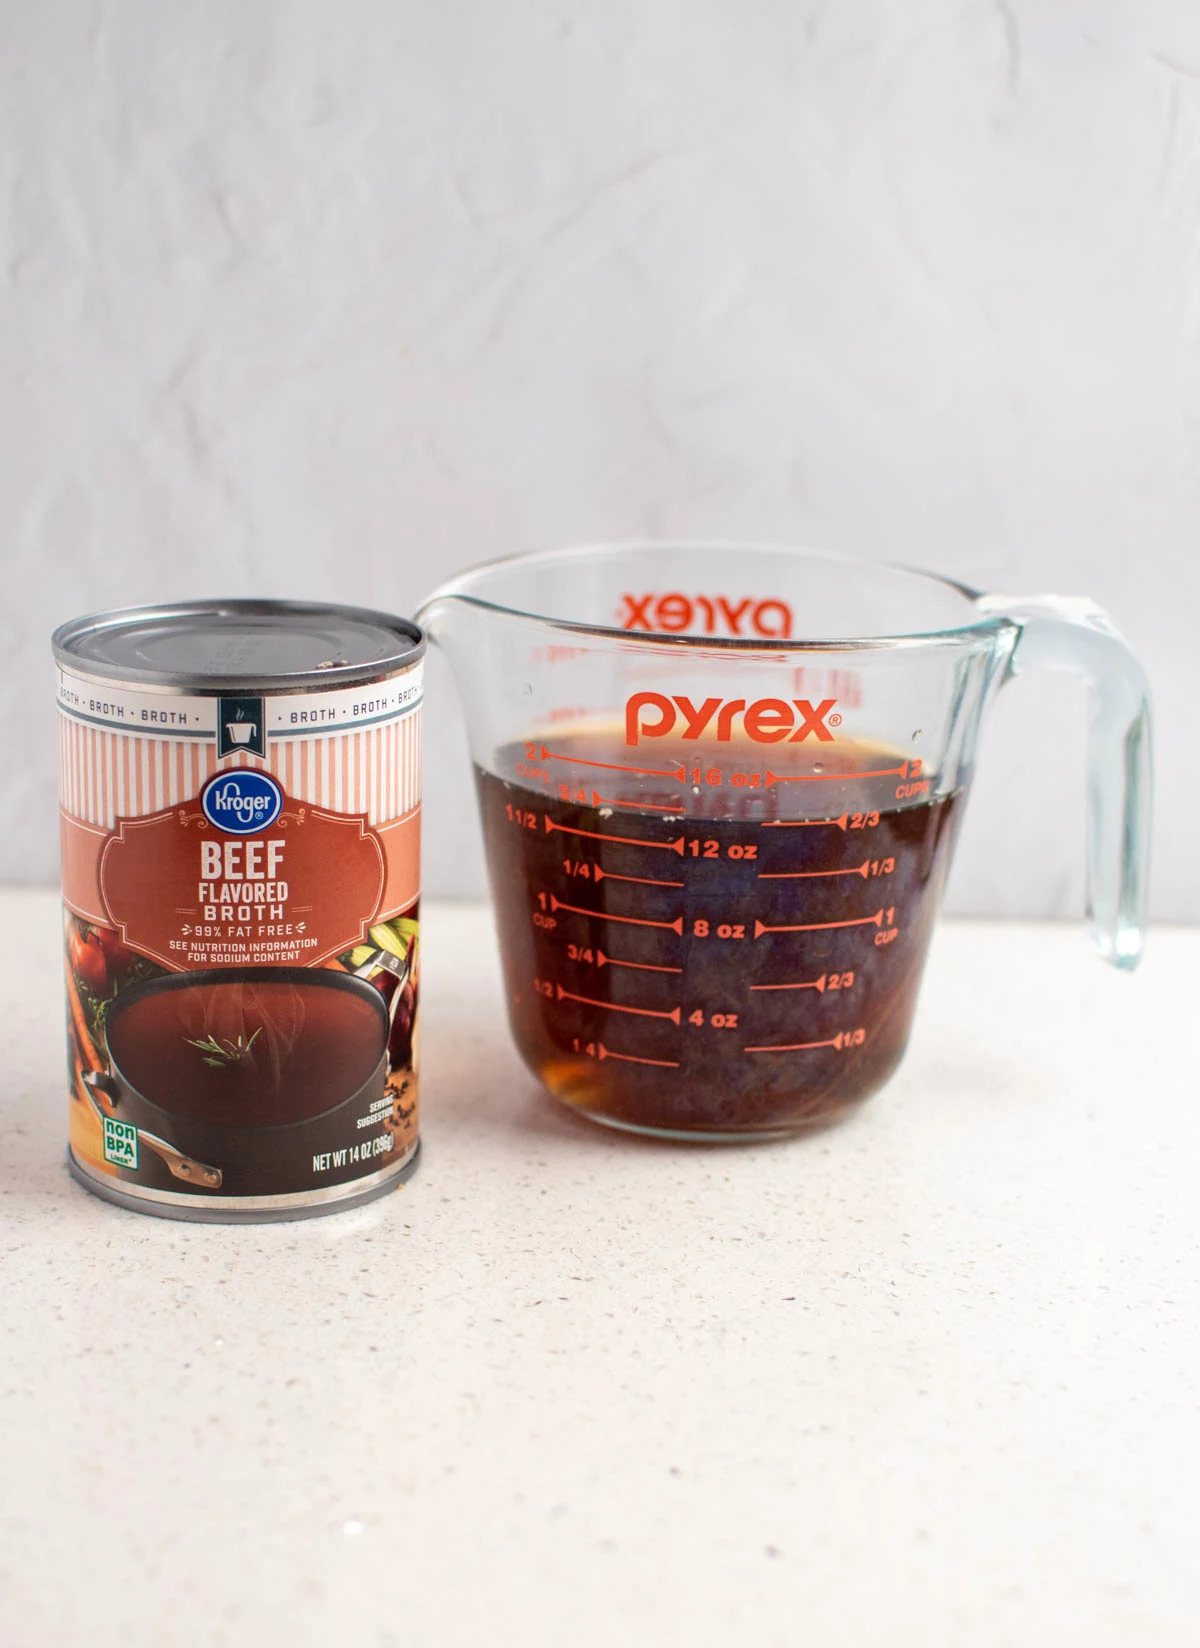 Beef broth in a glass measuring cup next to can of beef broth all on white kitchen counter.